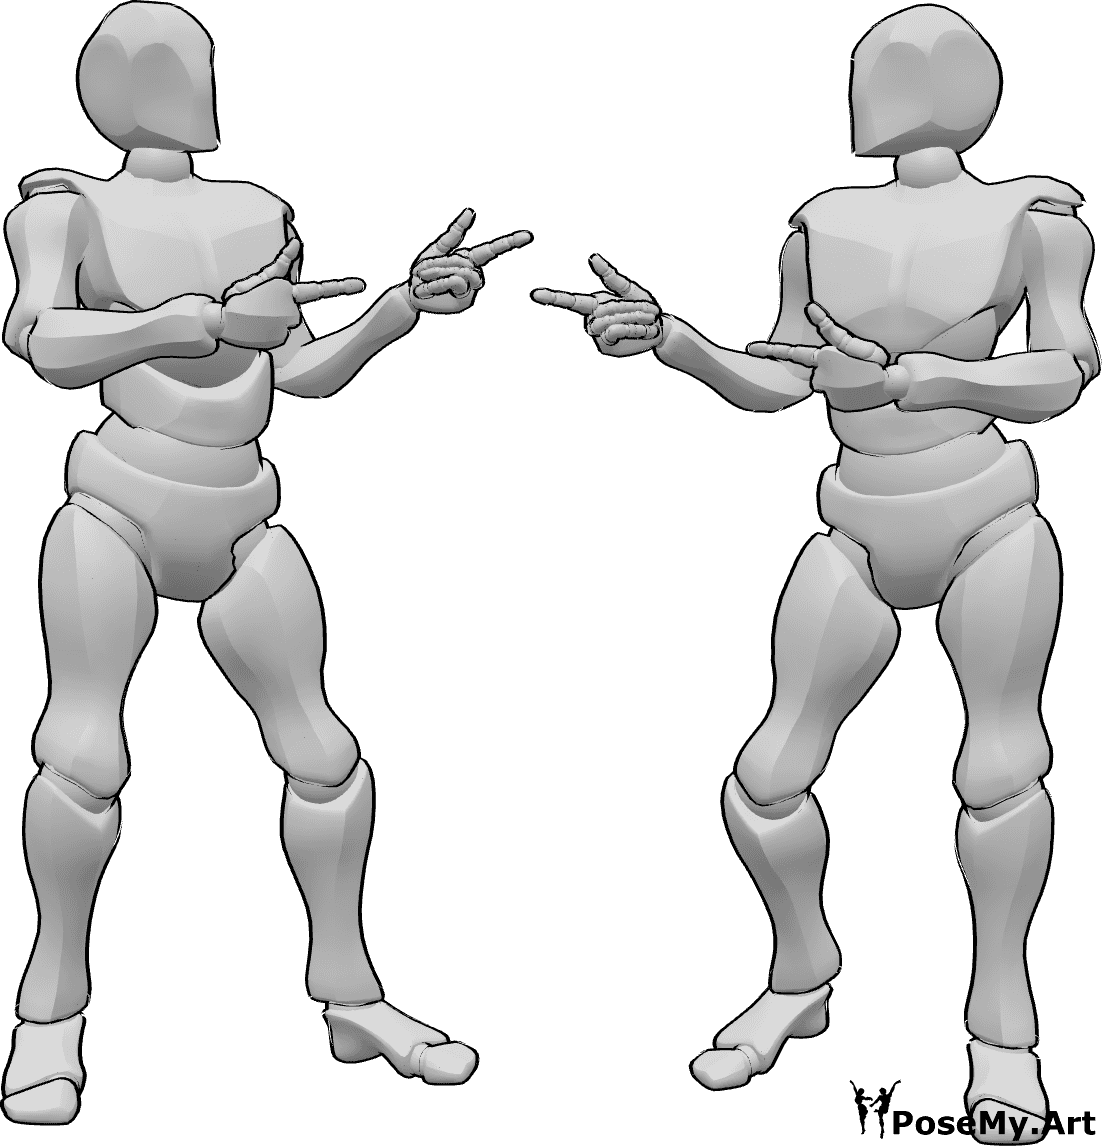 Pose Reference- Two males pointing pose - Two males are happily pointing at each other, saying 